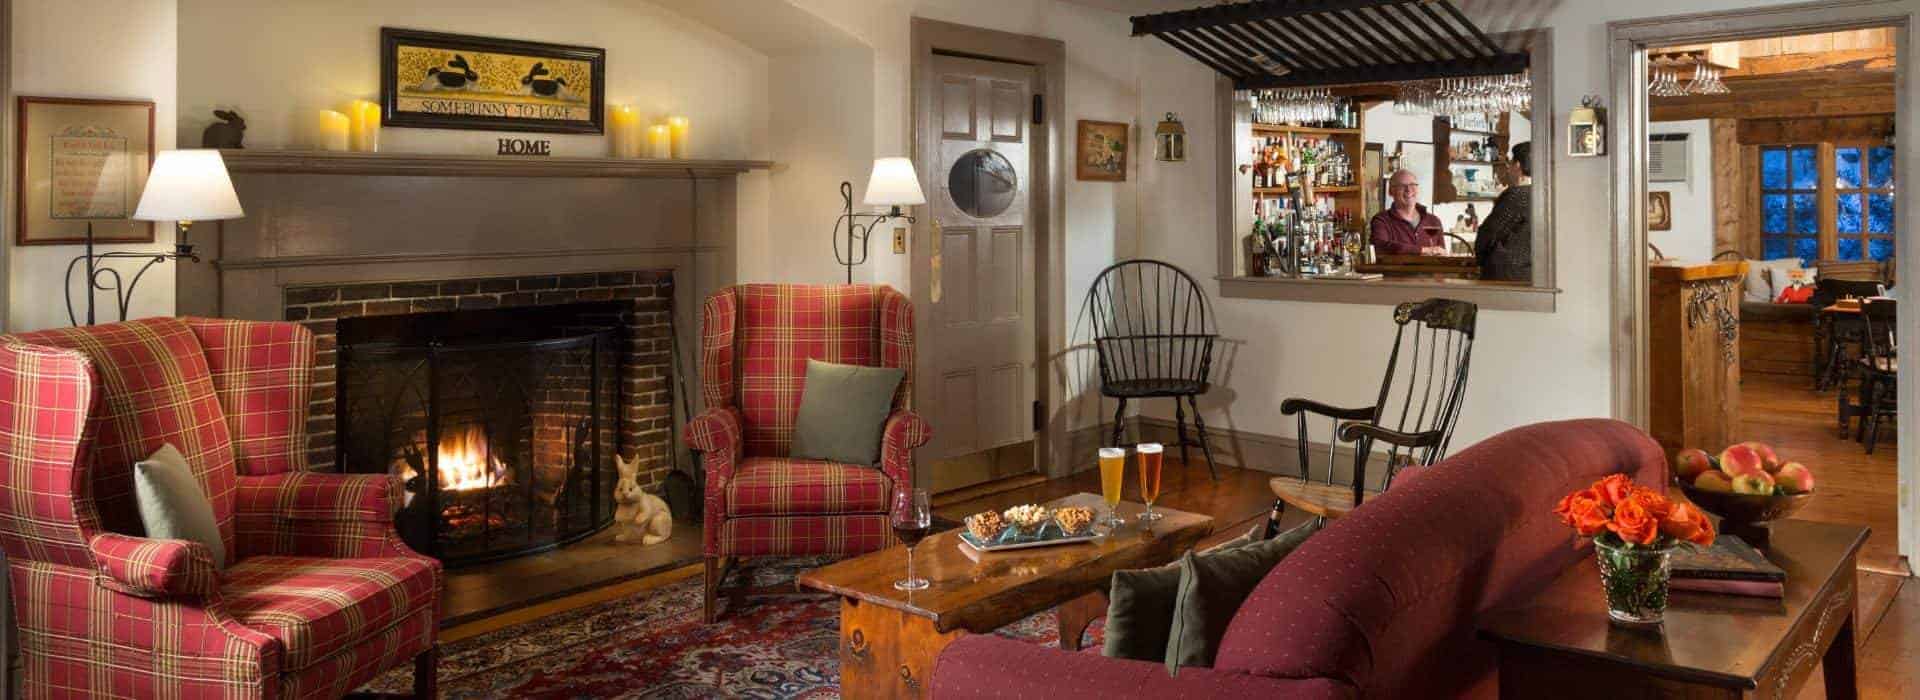 Rabbit Hill Inn - Common Area and Bar with Fireplace